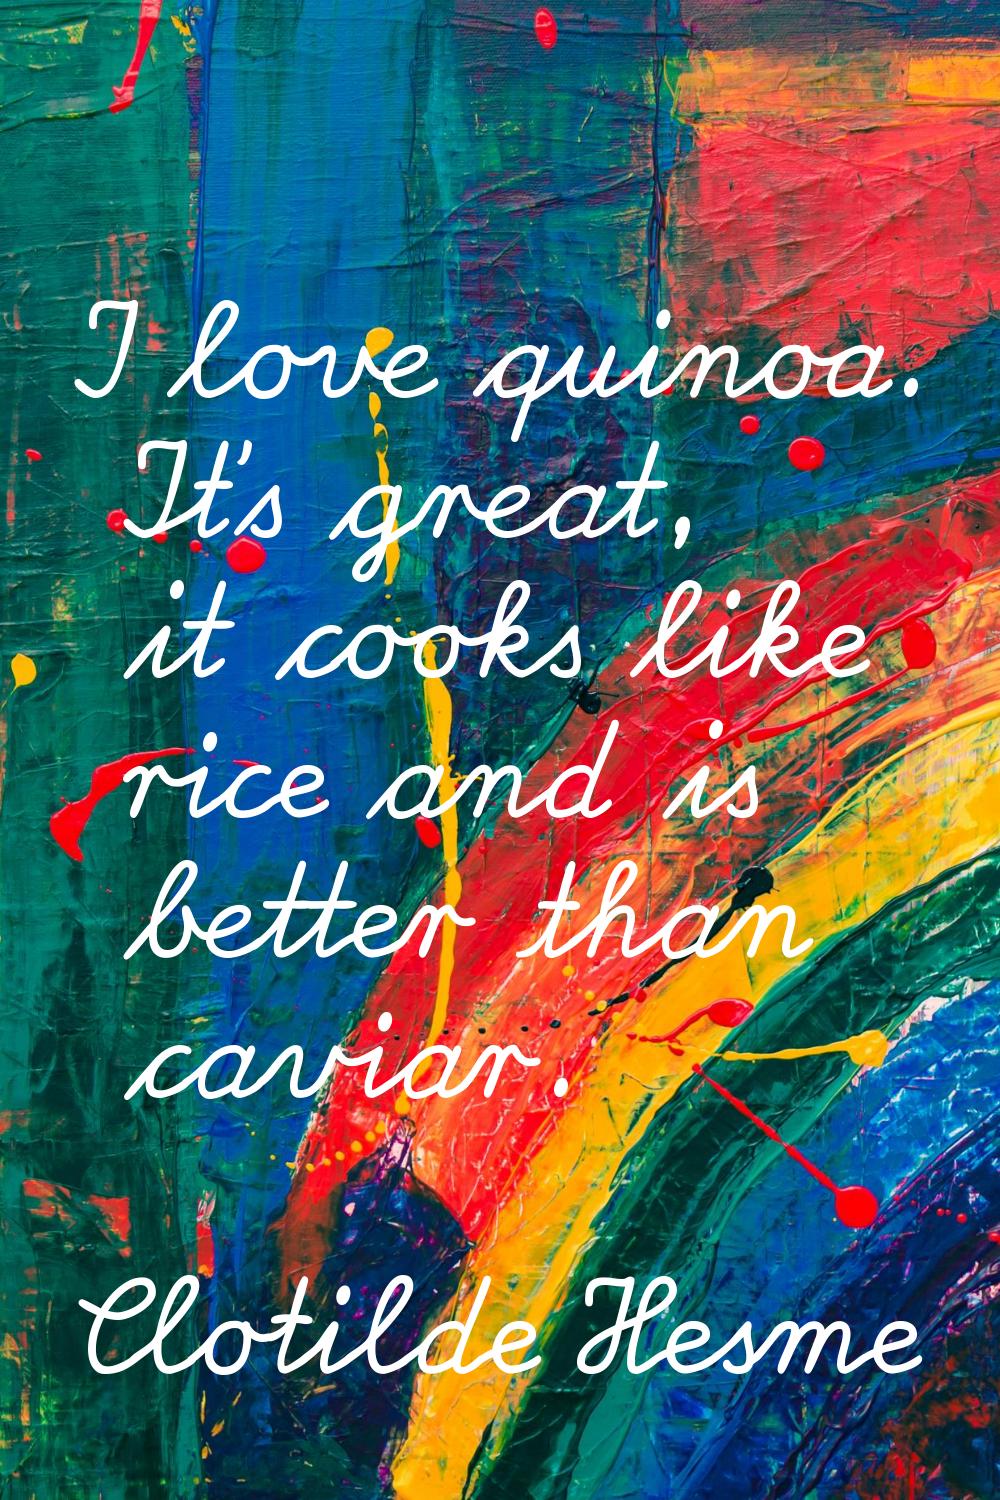 I love quinoa. It's great, it cooks like rice and is better than caviar.